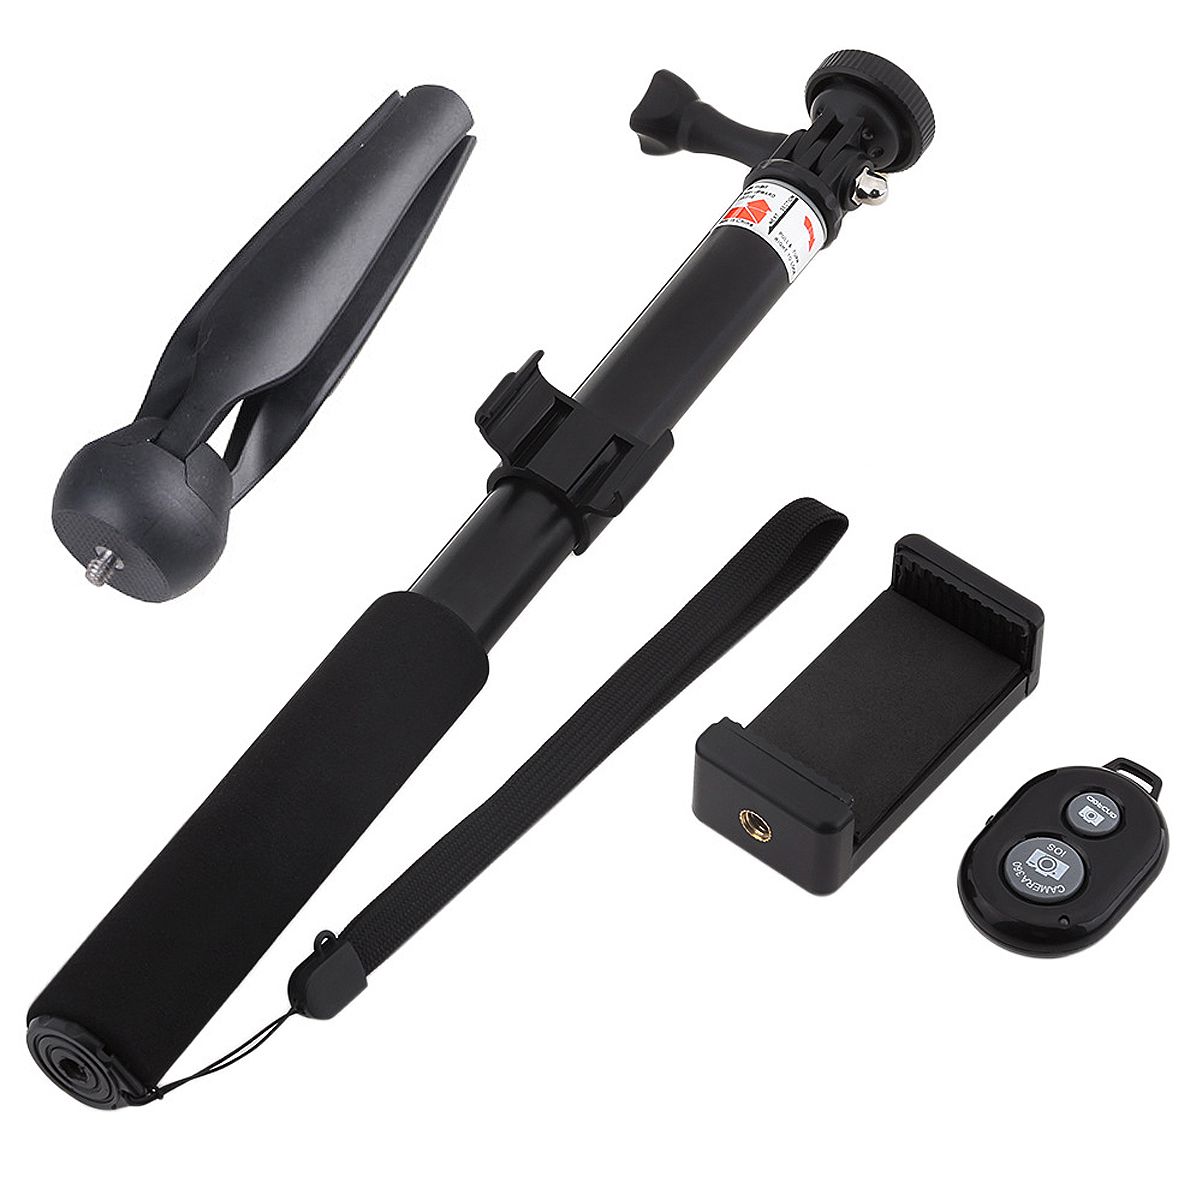 Extendable-Folding-Monopod-Remote-Selfie-Stick-Tripod-with-bluetooth-Shutter-for-Smartphone-Action-C-1639177